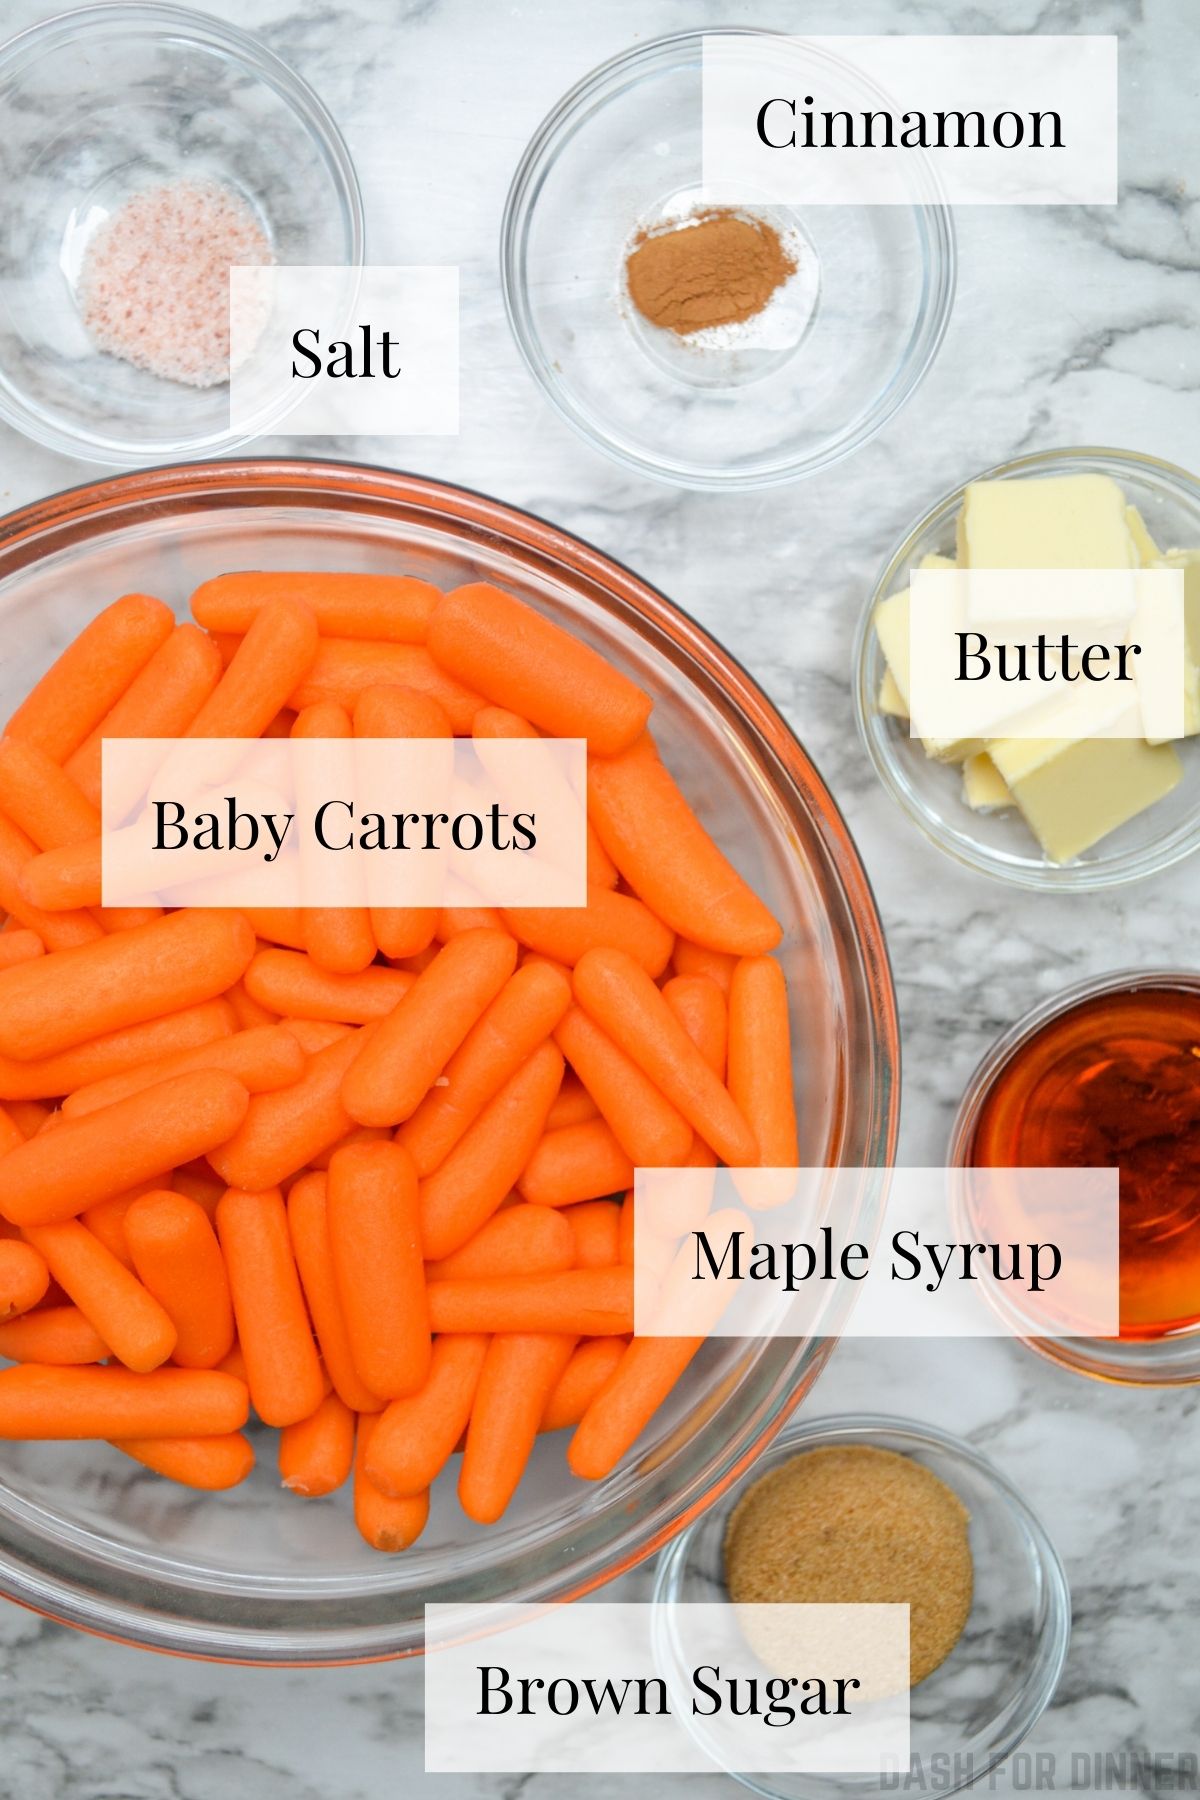 The ingredients needed to make slow cooker maple and brown sugar glazed carrots.